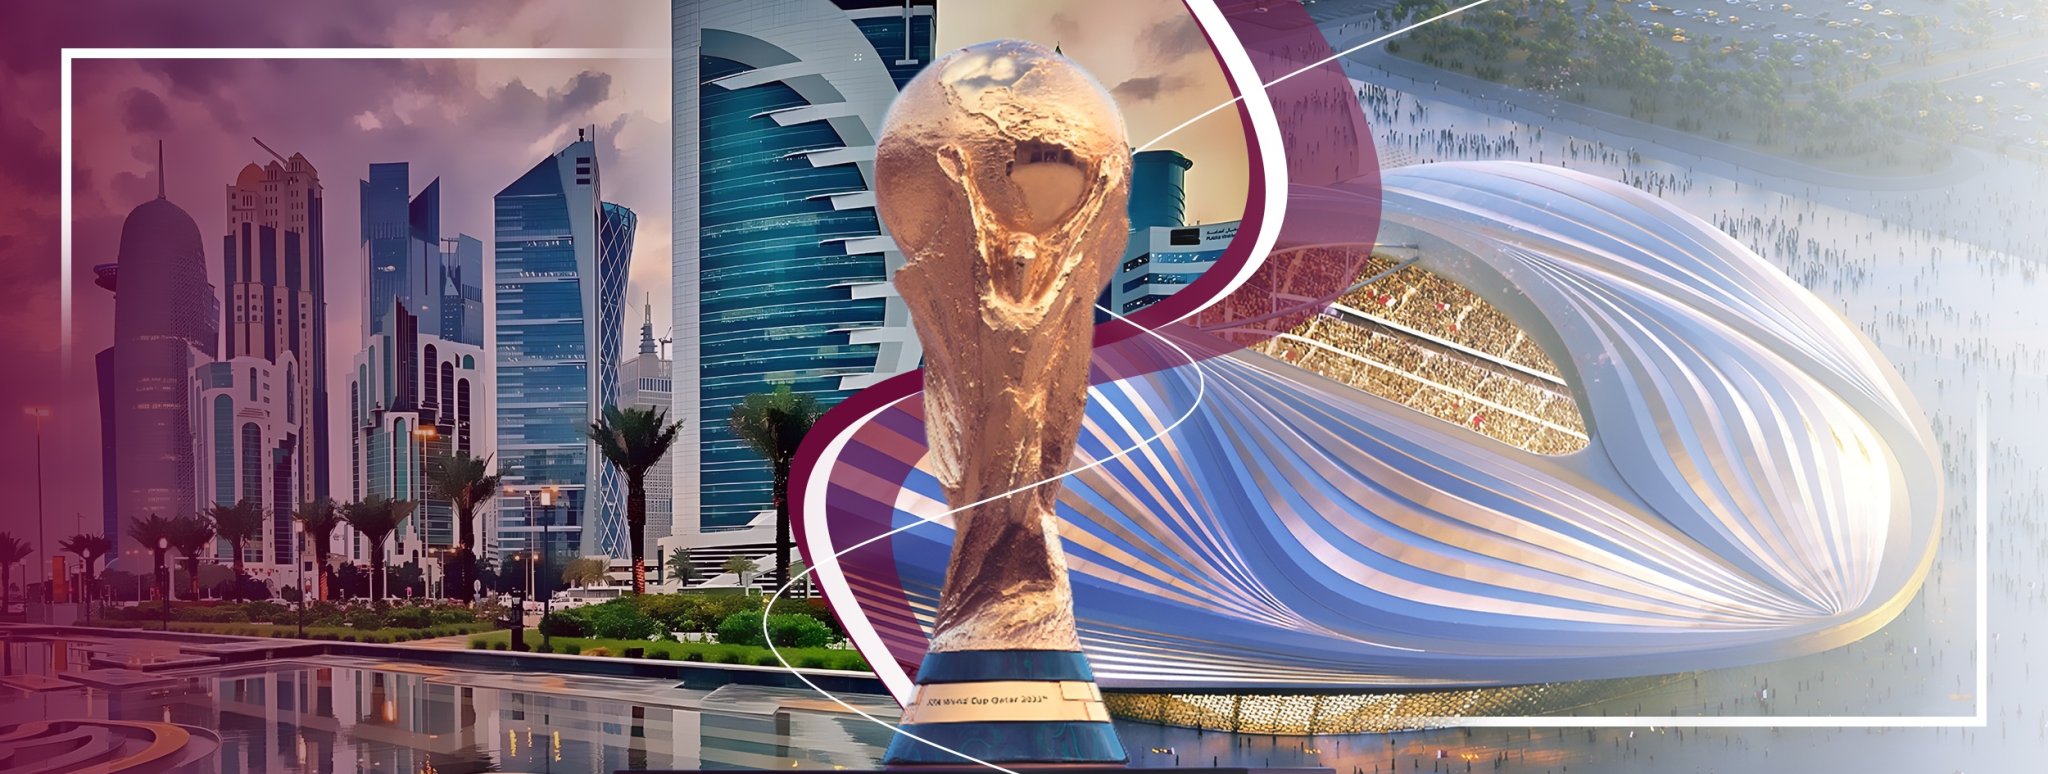 FIFA Olympic Trophy and stadium 